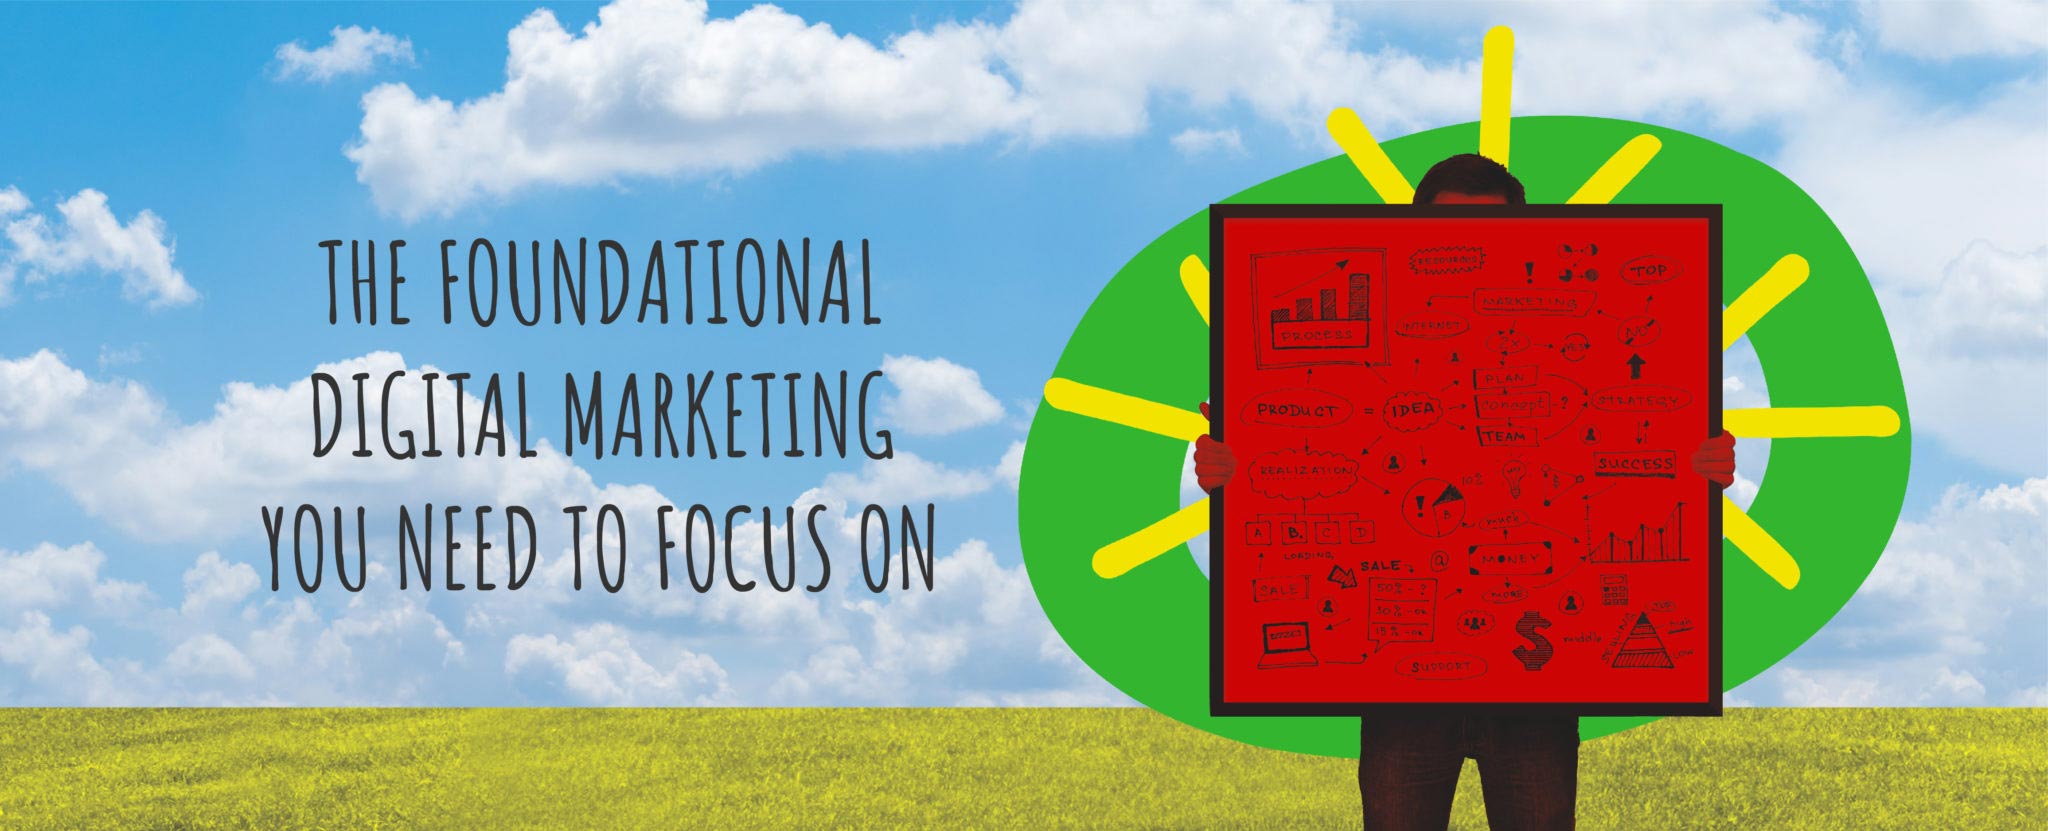 The Foundational Digital Marketing You Need to Focus On